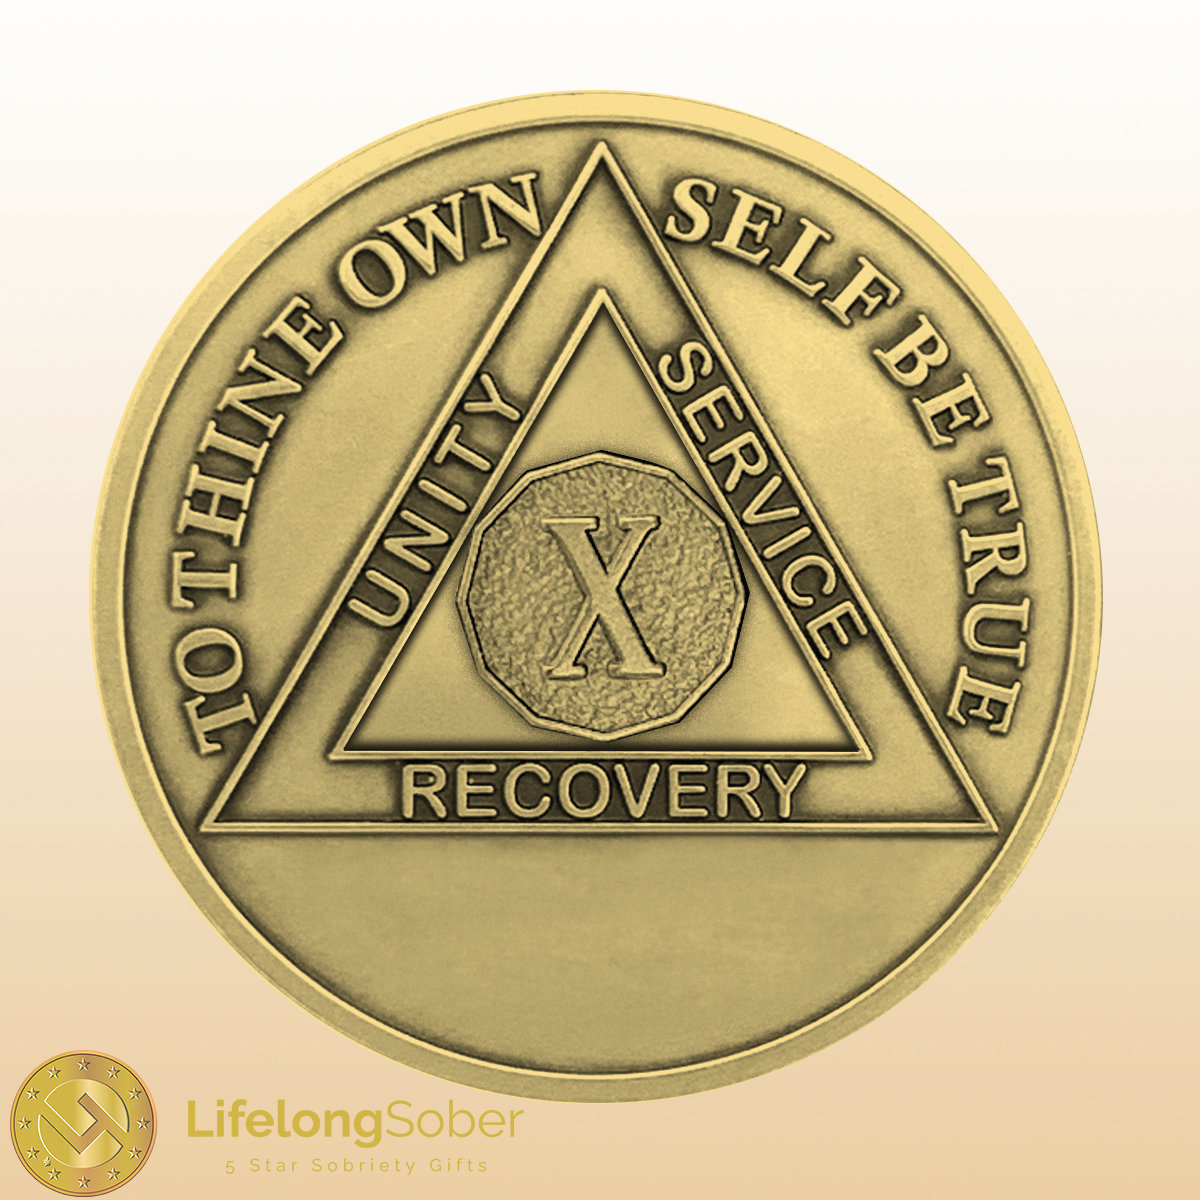 Unity, Service, and Recovery Coin - Milestone Coins